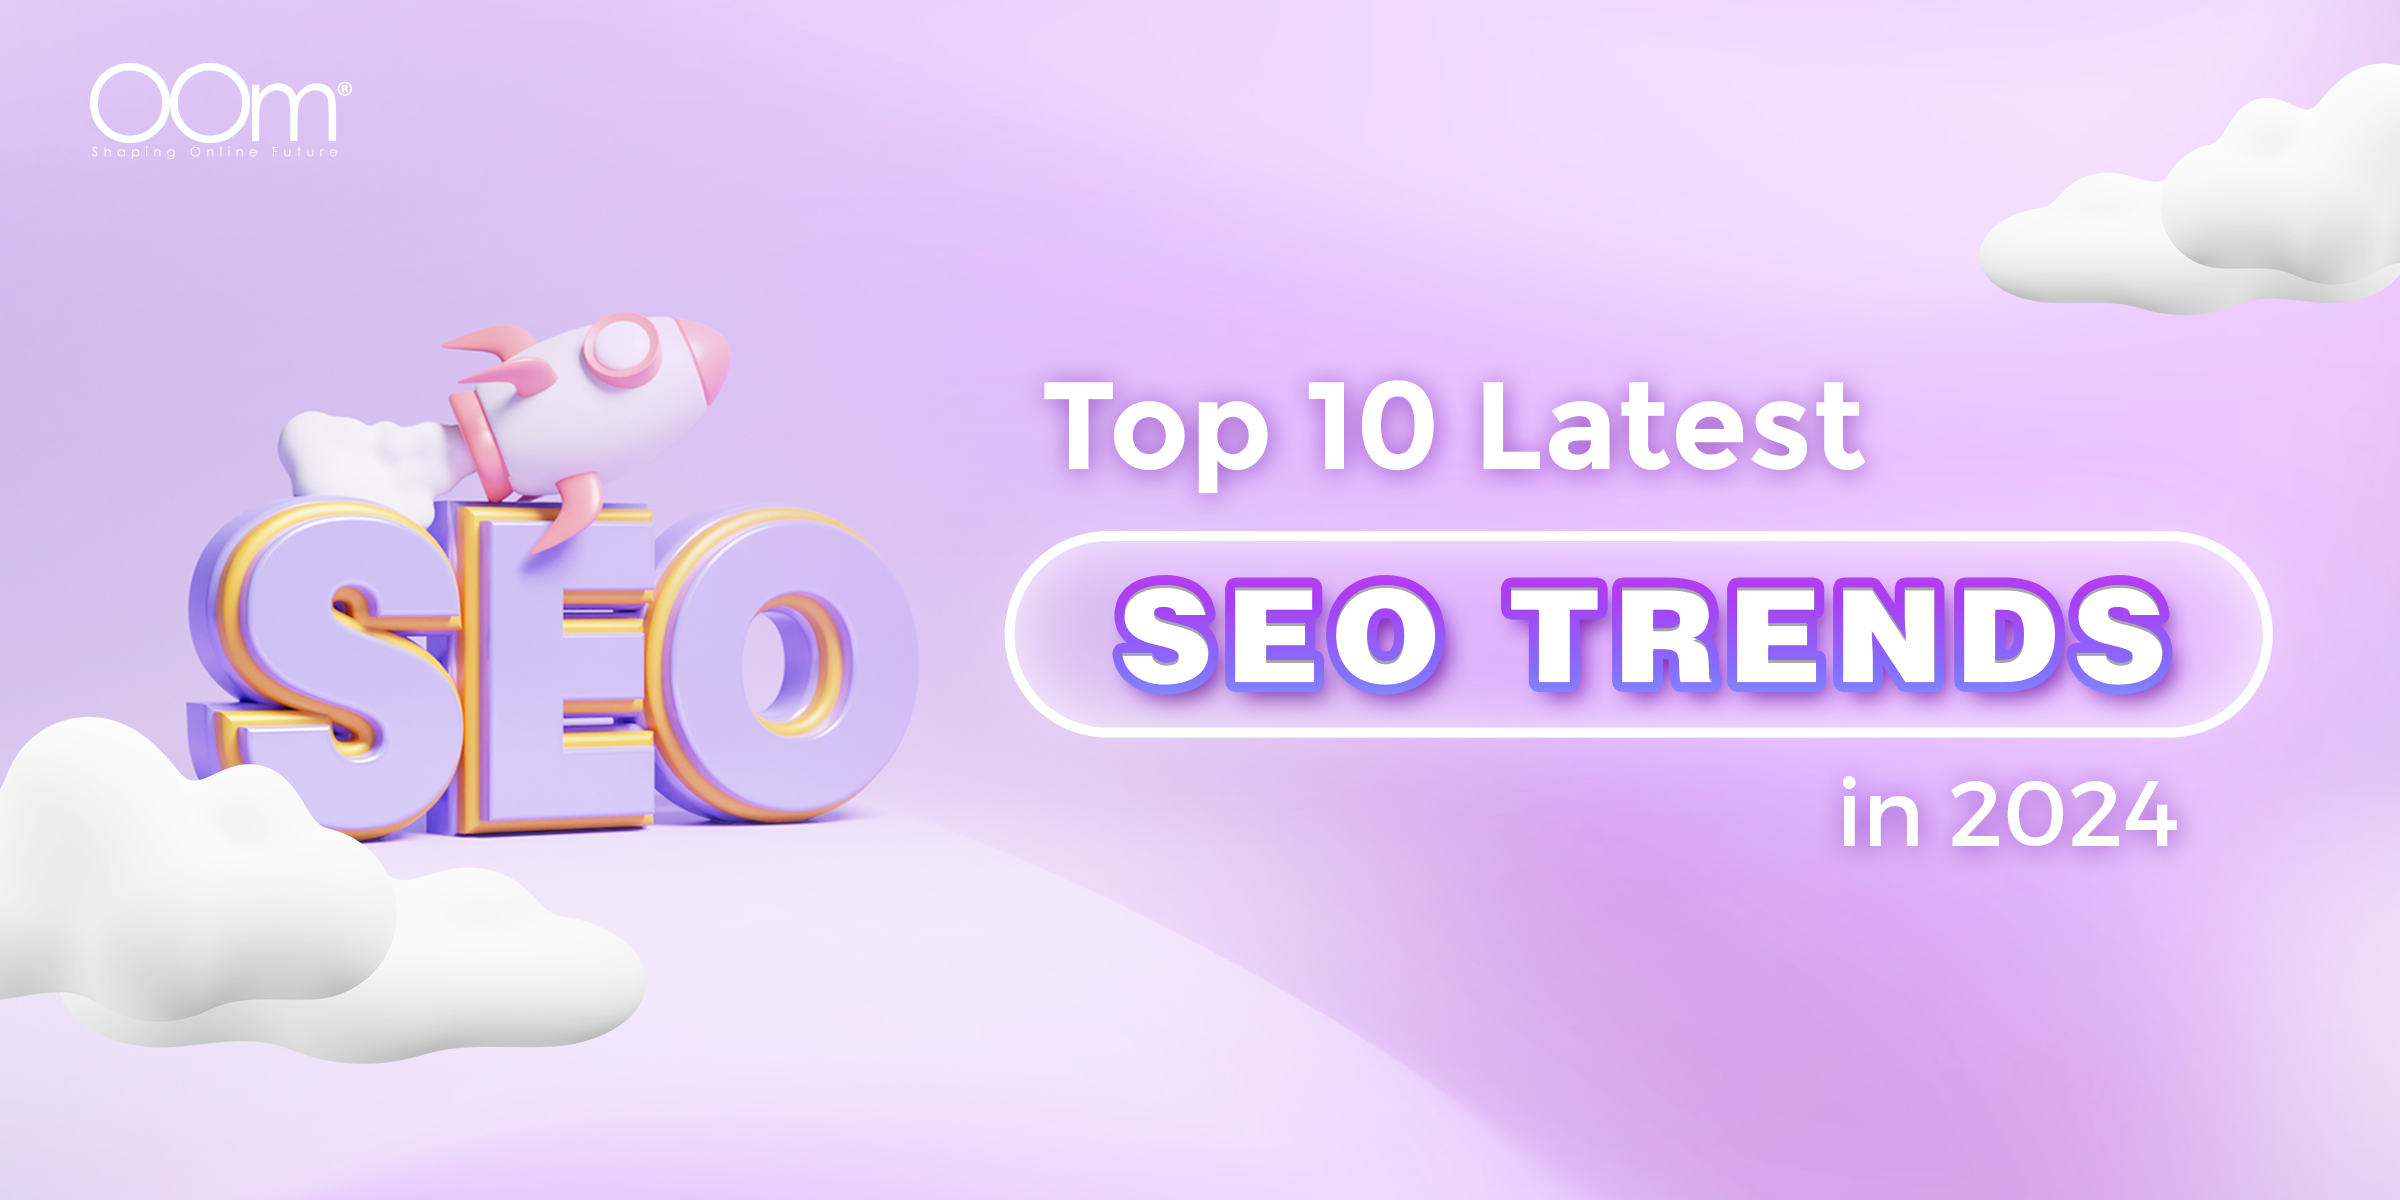 Top 10 Latest SEO Trends in 2024